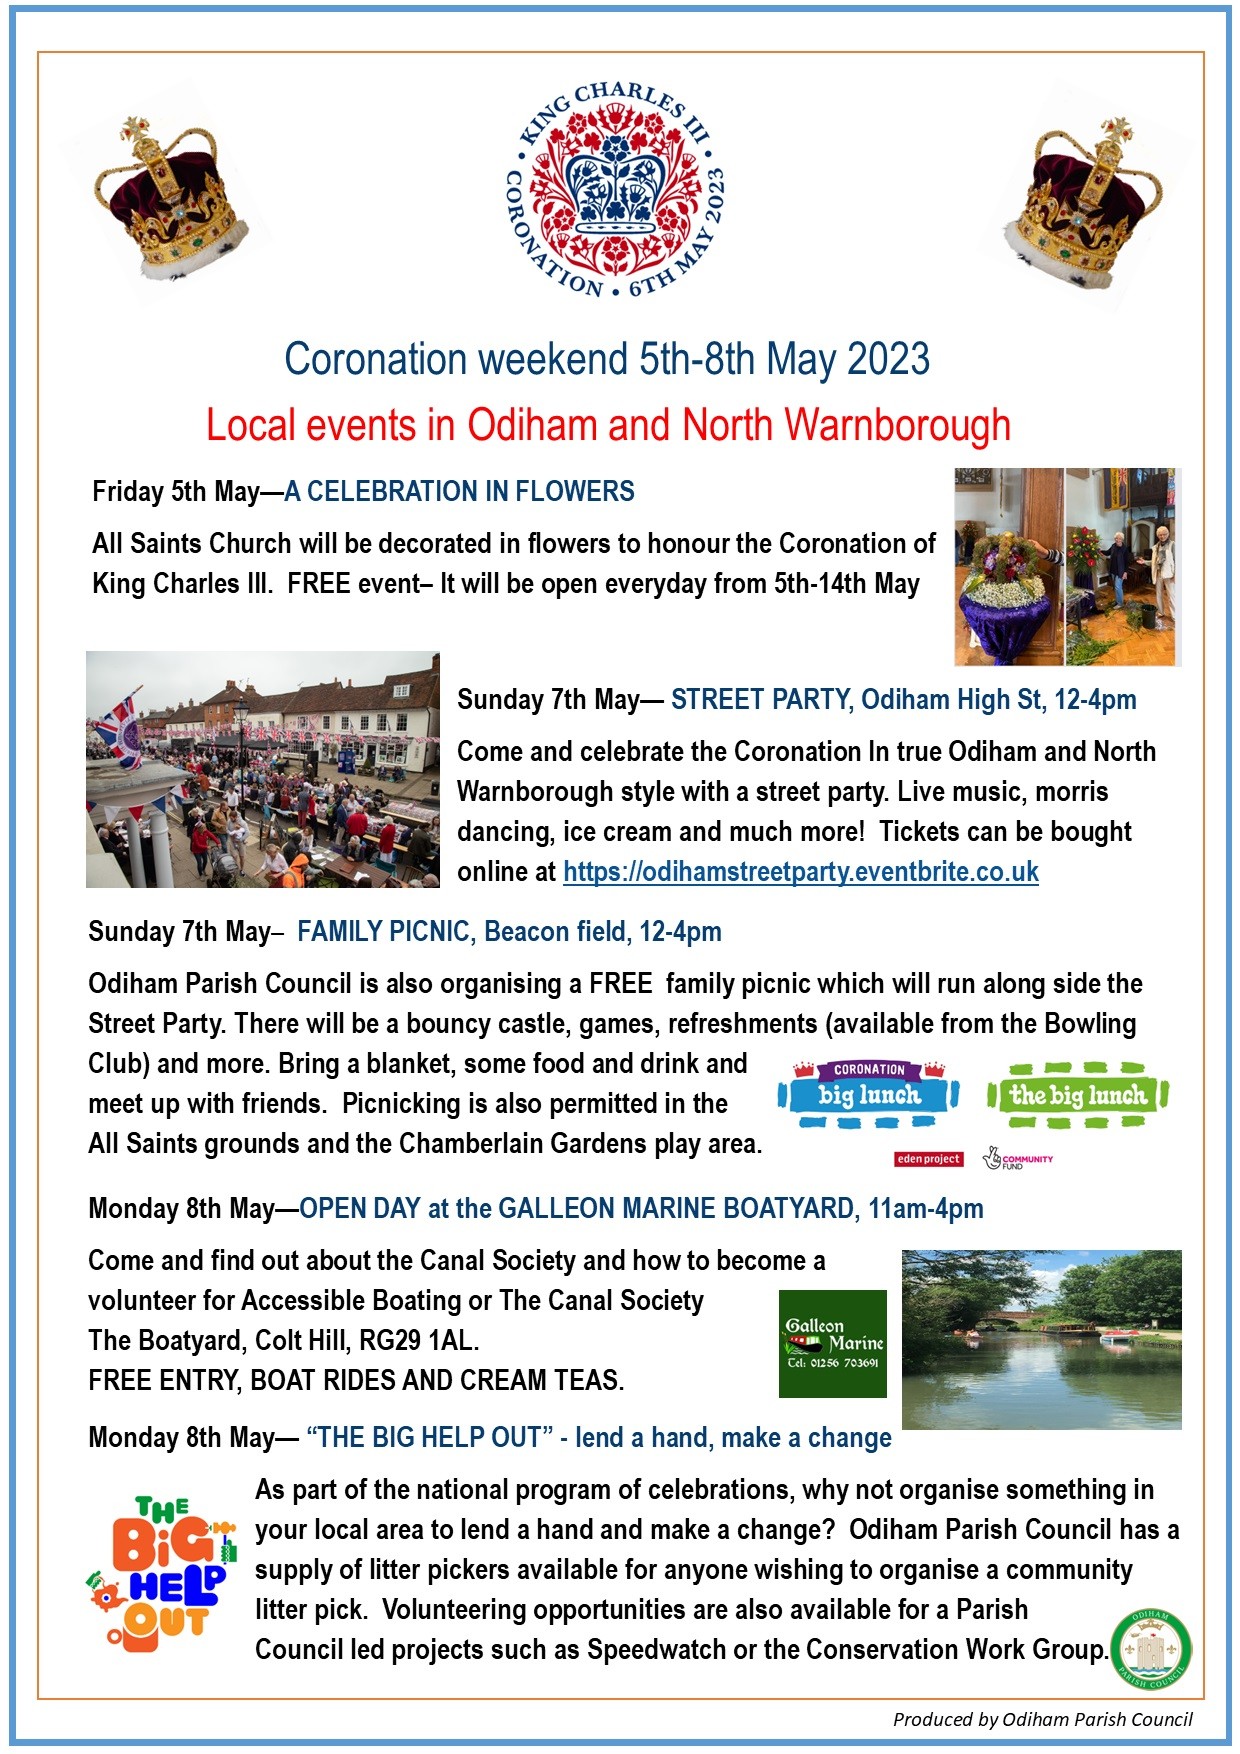 local events poster updated AM 13 04 23 Copy